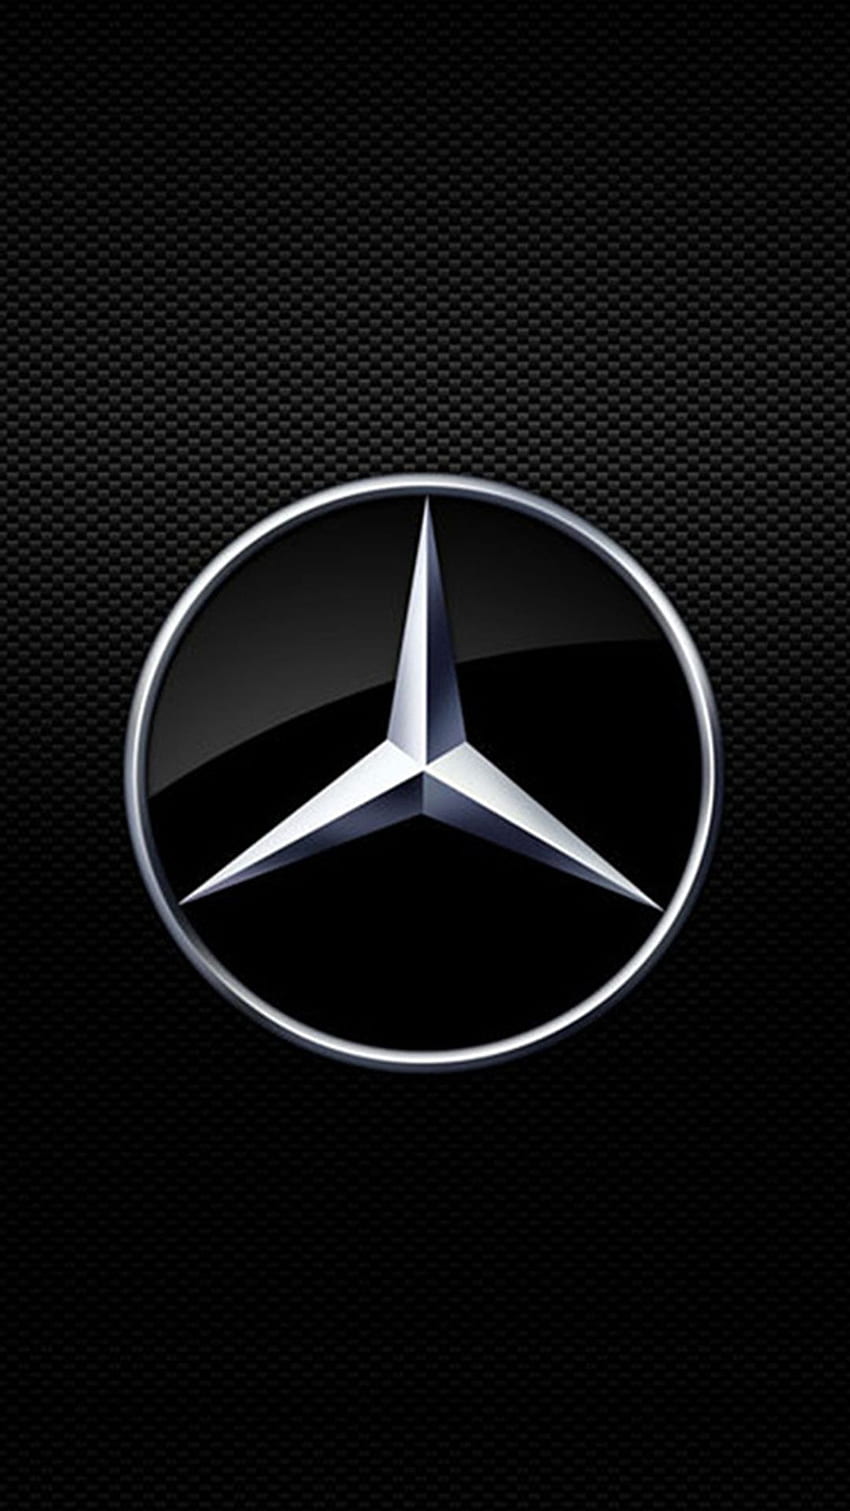 Cars Logo Wallpapers  Top 29 Best Cars Logo Wallpapers  HQ 